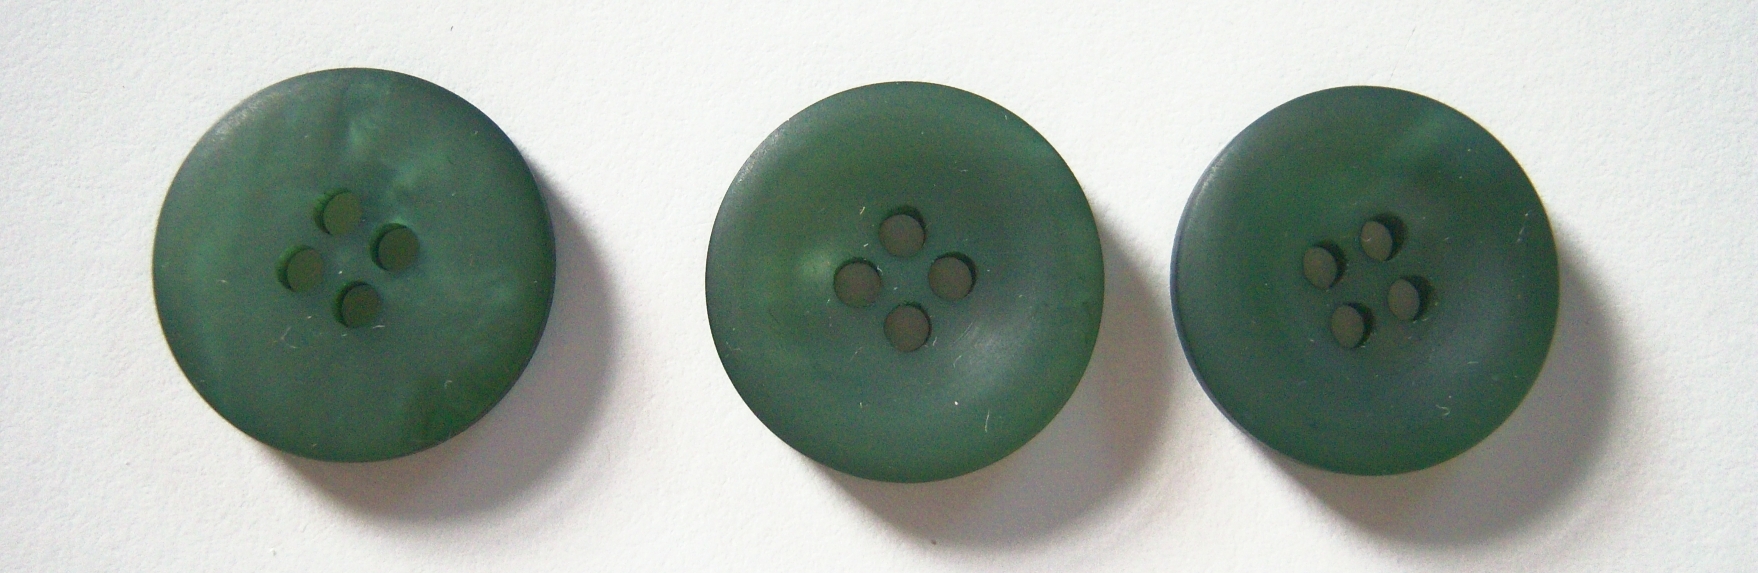 Green Blue Pearlized 13/16" 4 Hole Button